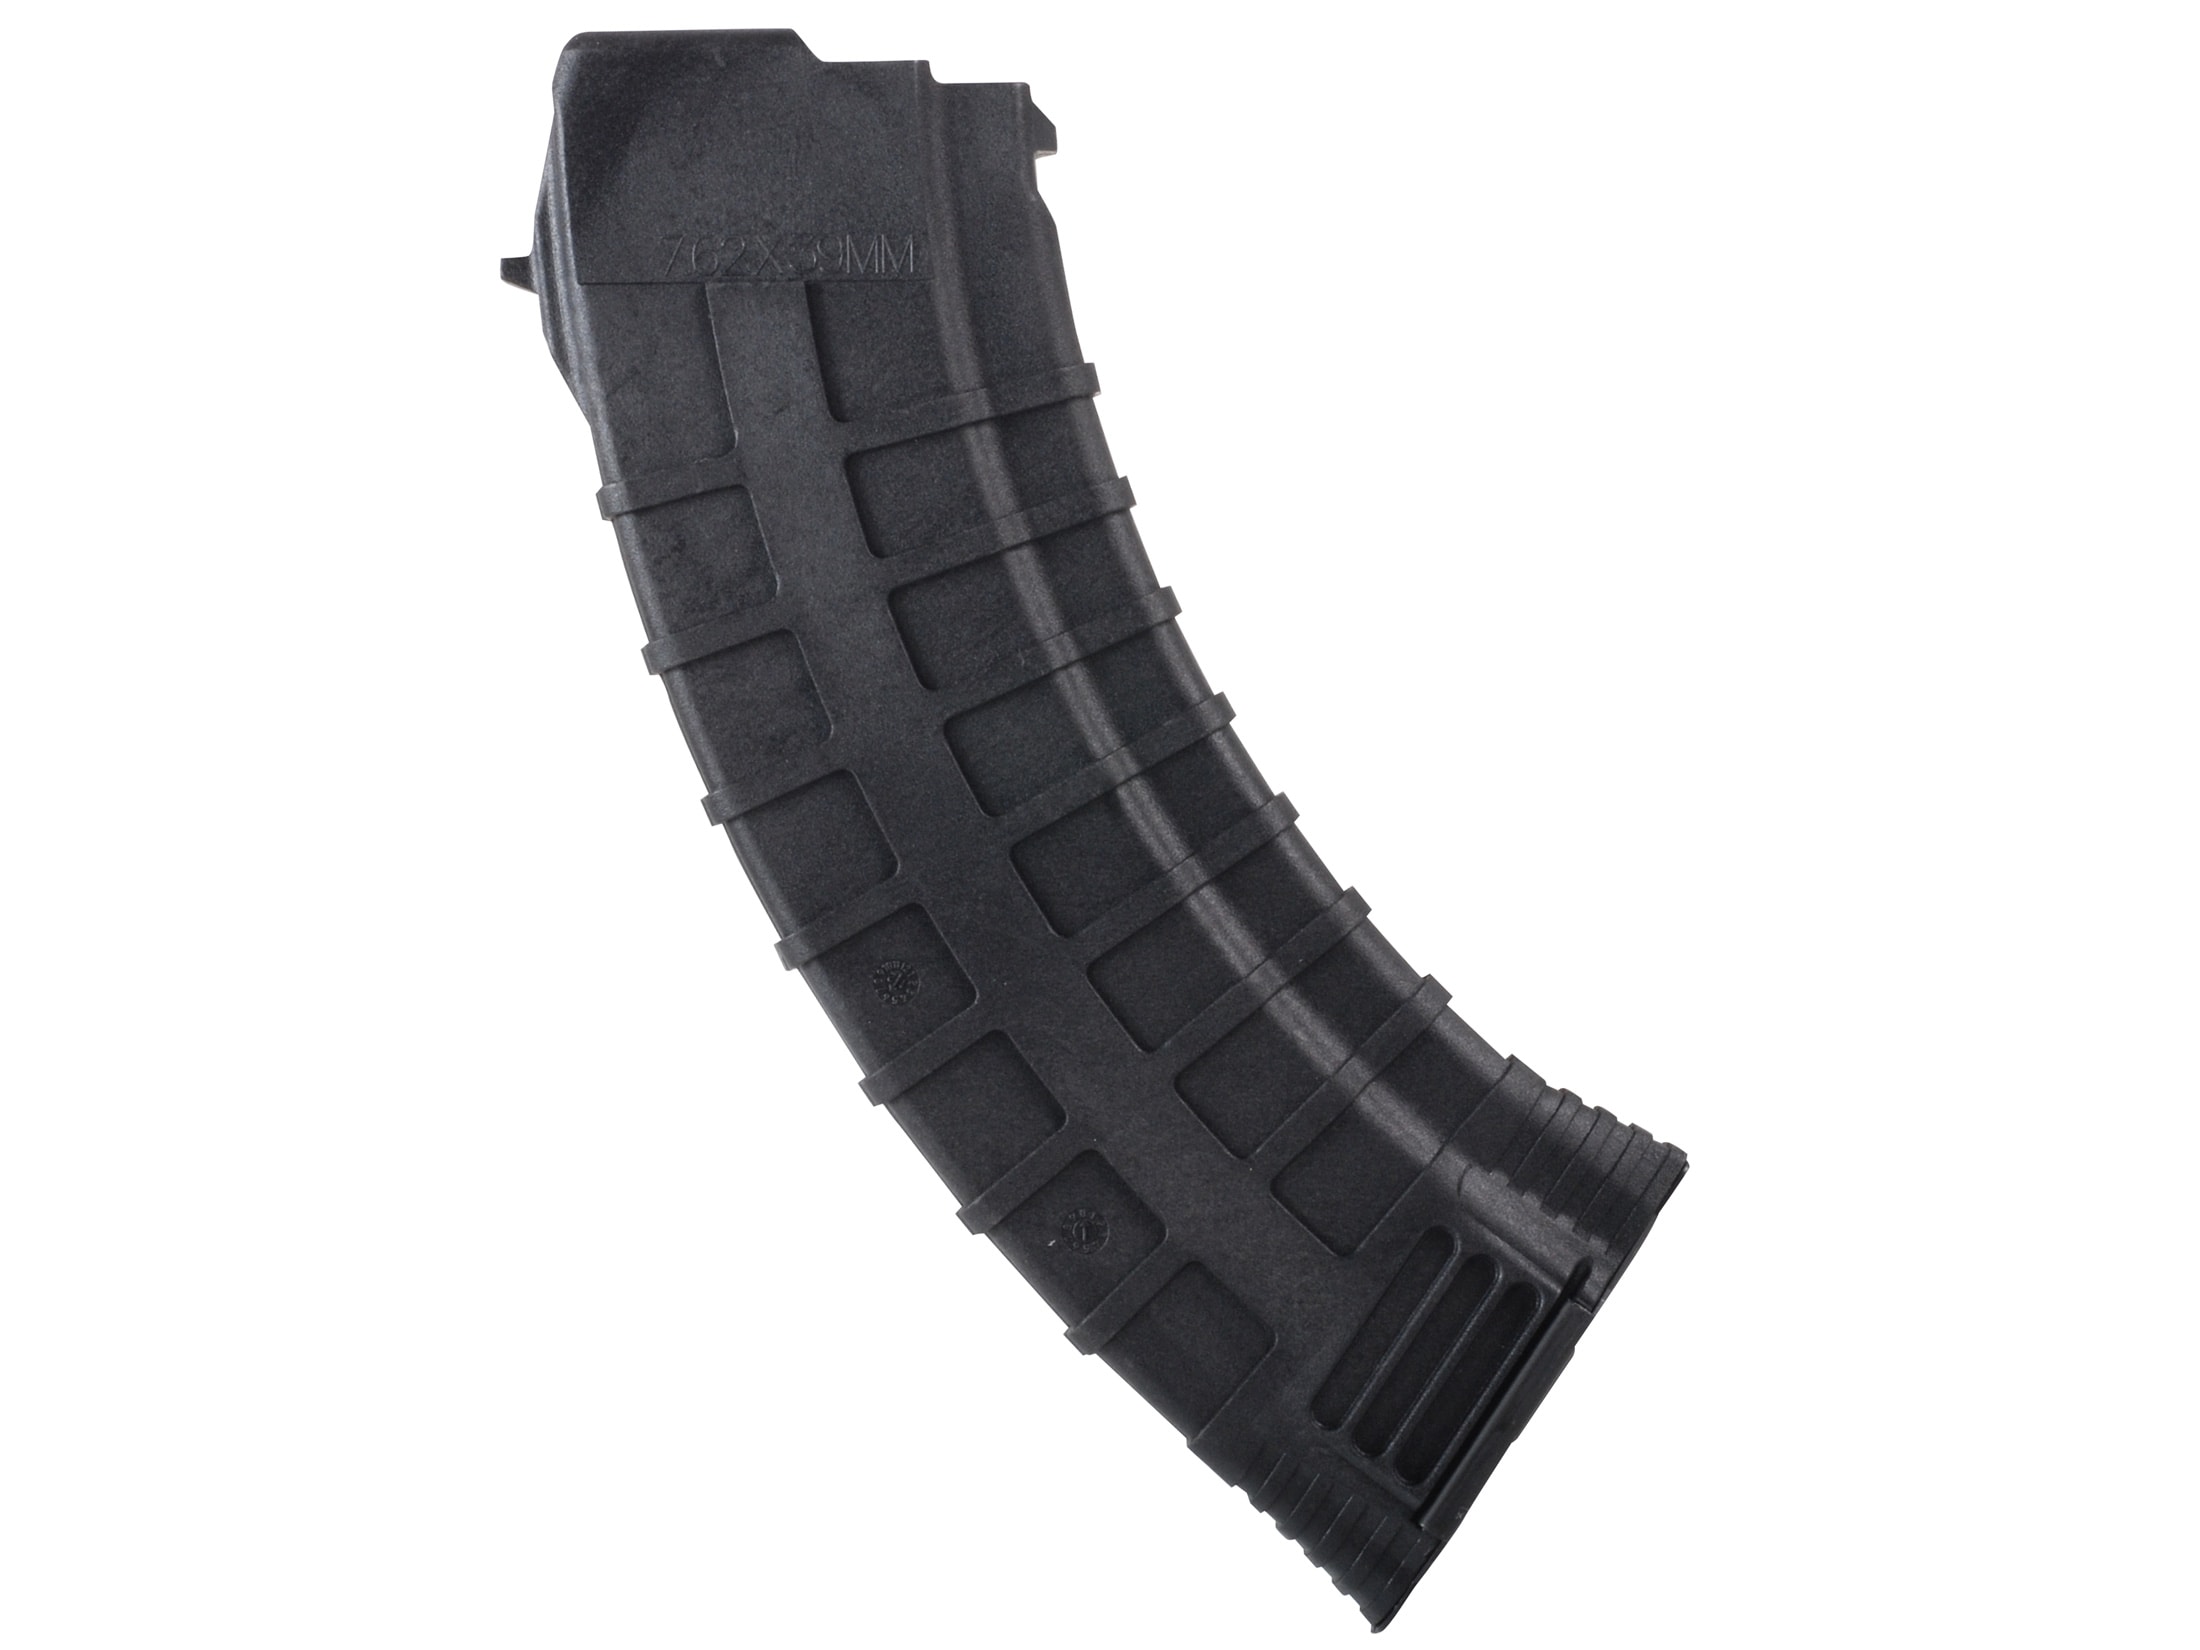 TAPCO Intrafuse Mag AK-47 7.62x39mm 30-Round Polymer Flat 